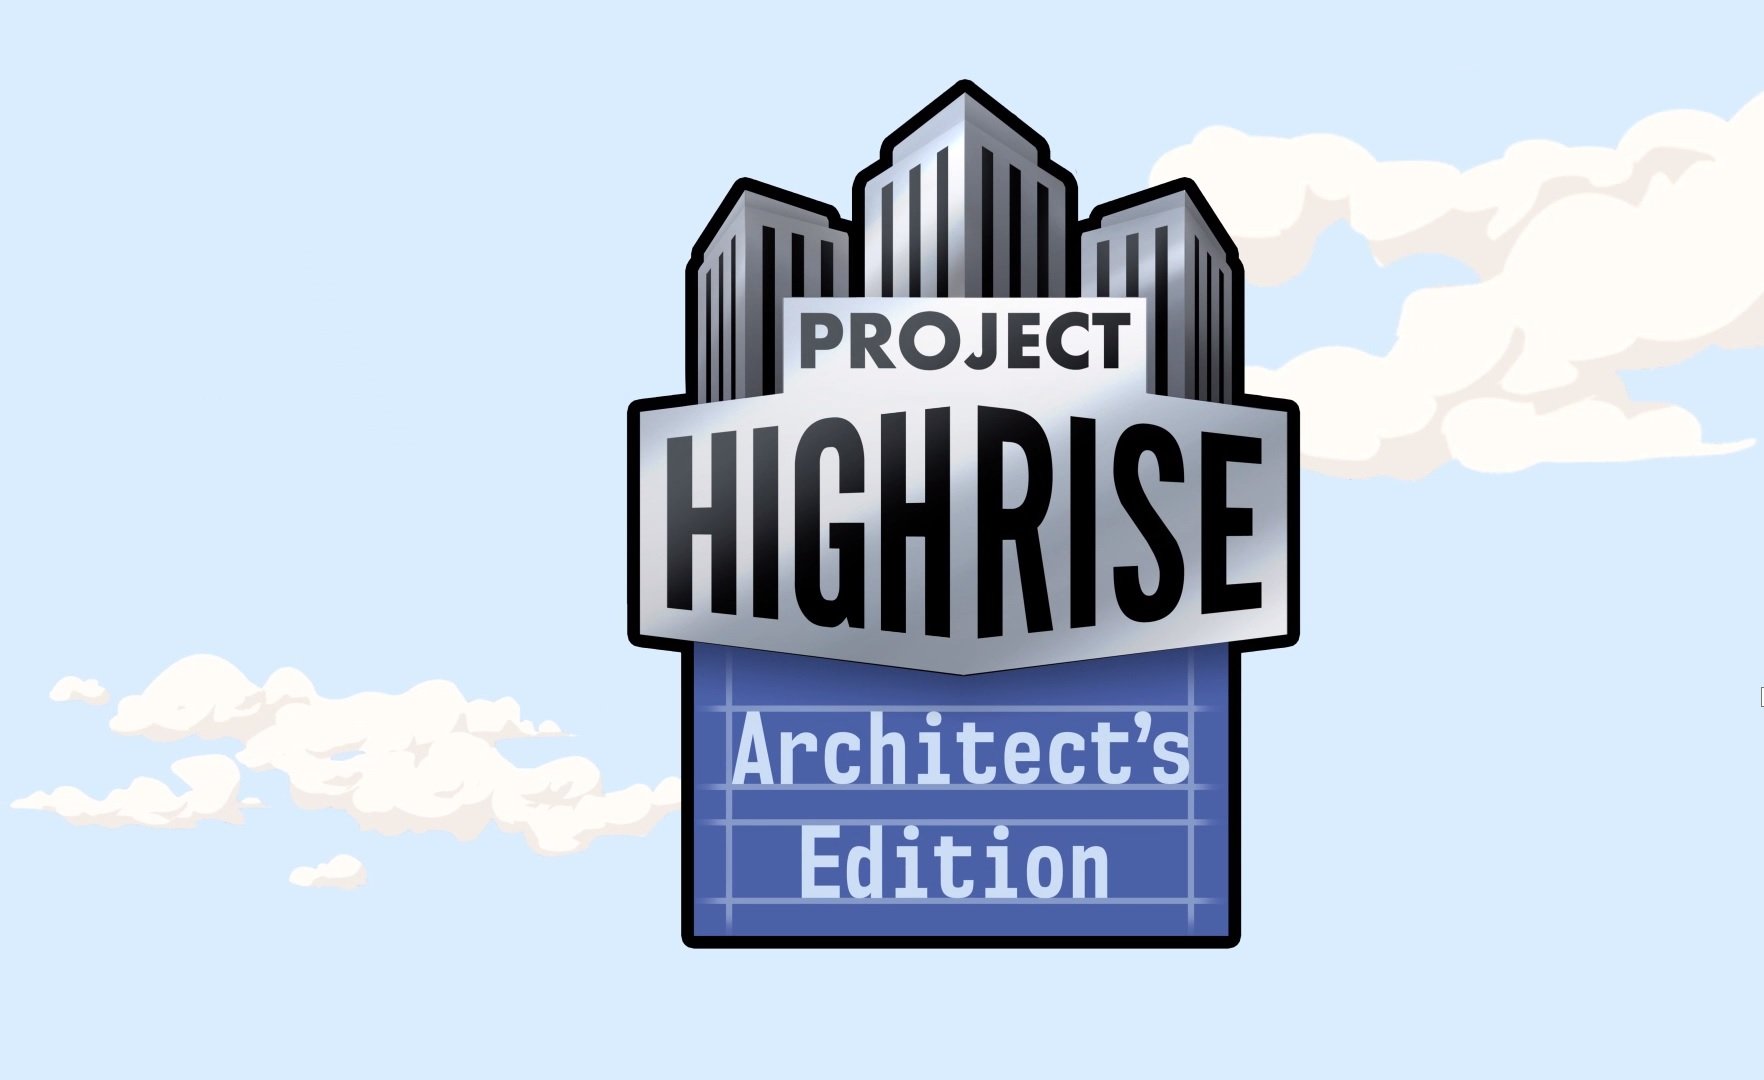 Review: Project Highrise: Architect’s Edition is a well made but repetitive experience